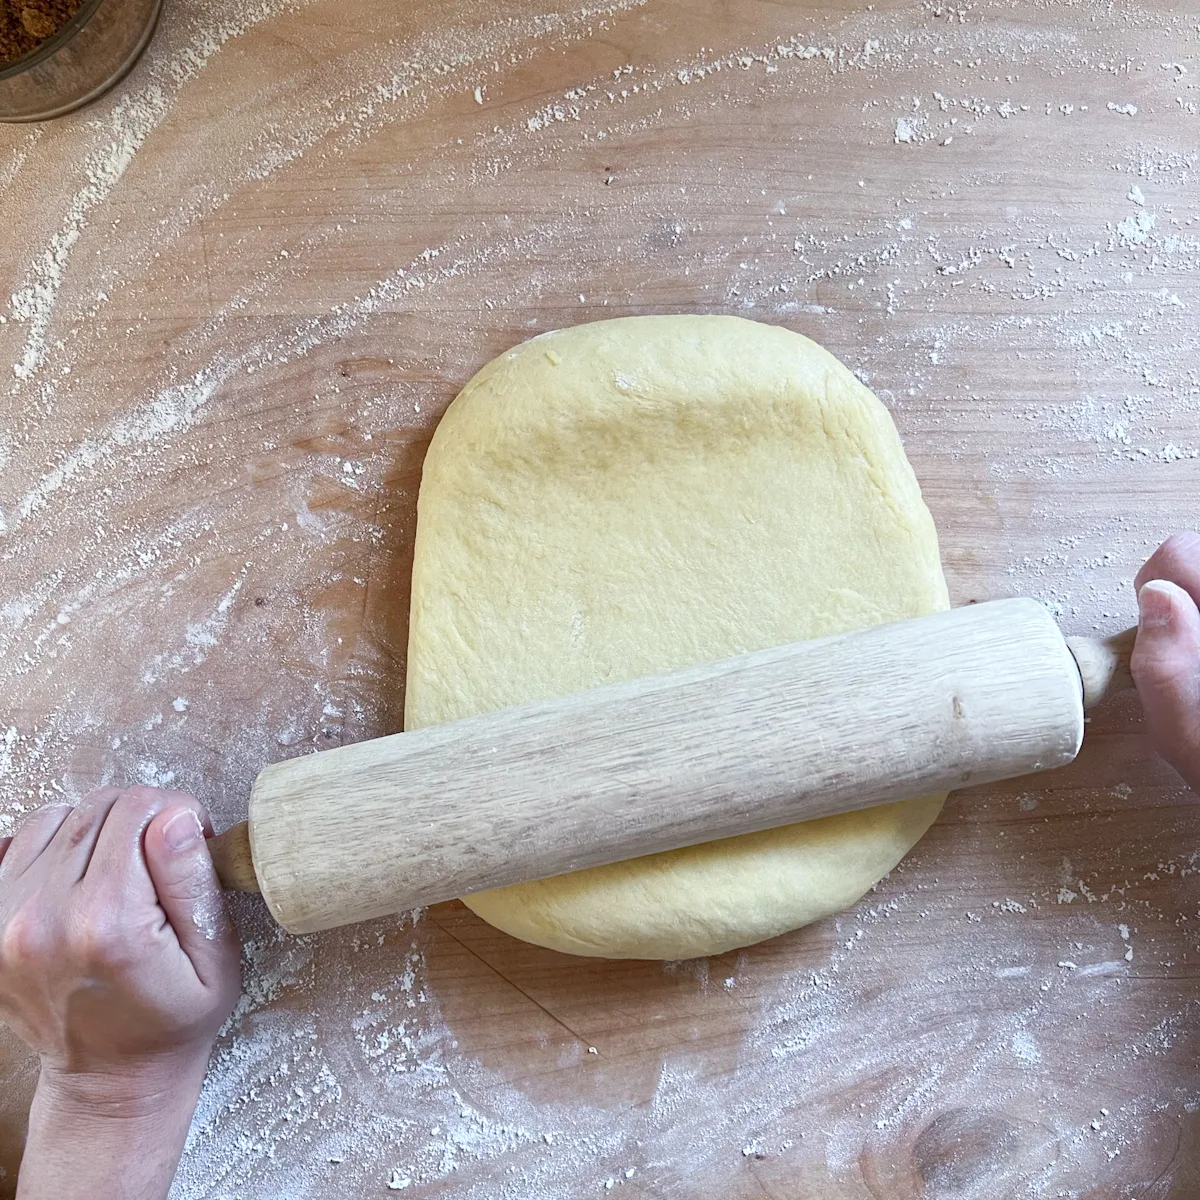 Brioche dough being rolled out with a rolling pin.